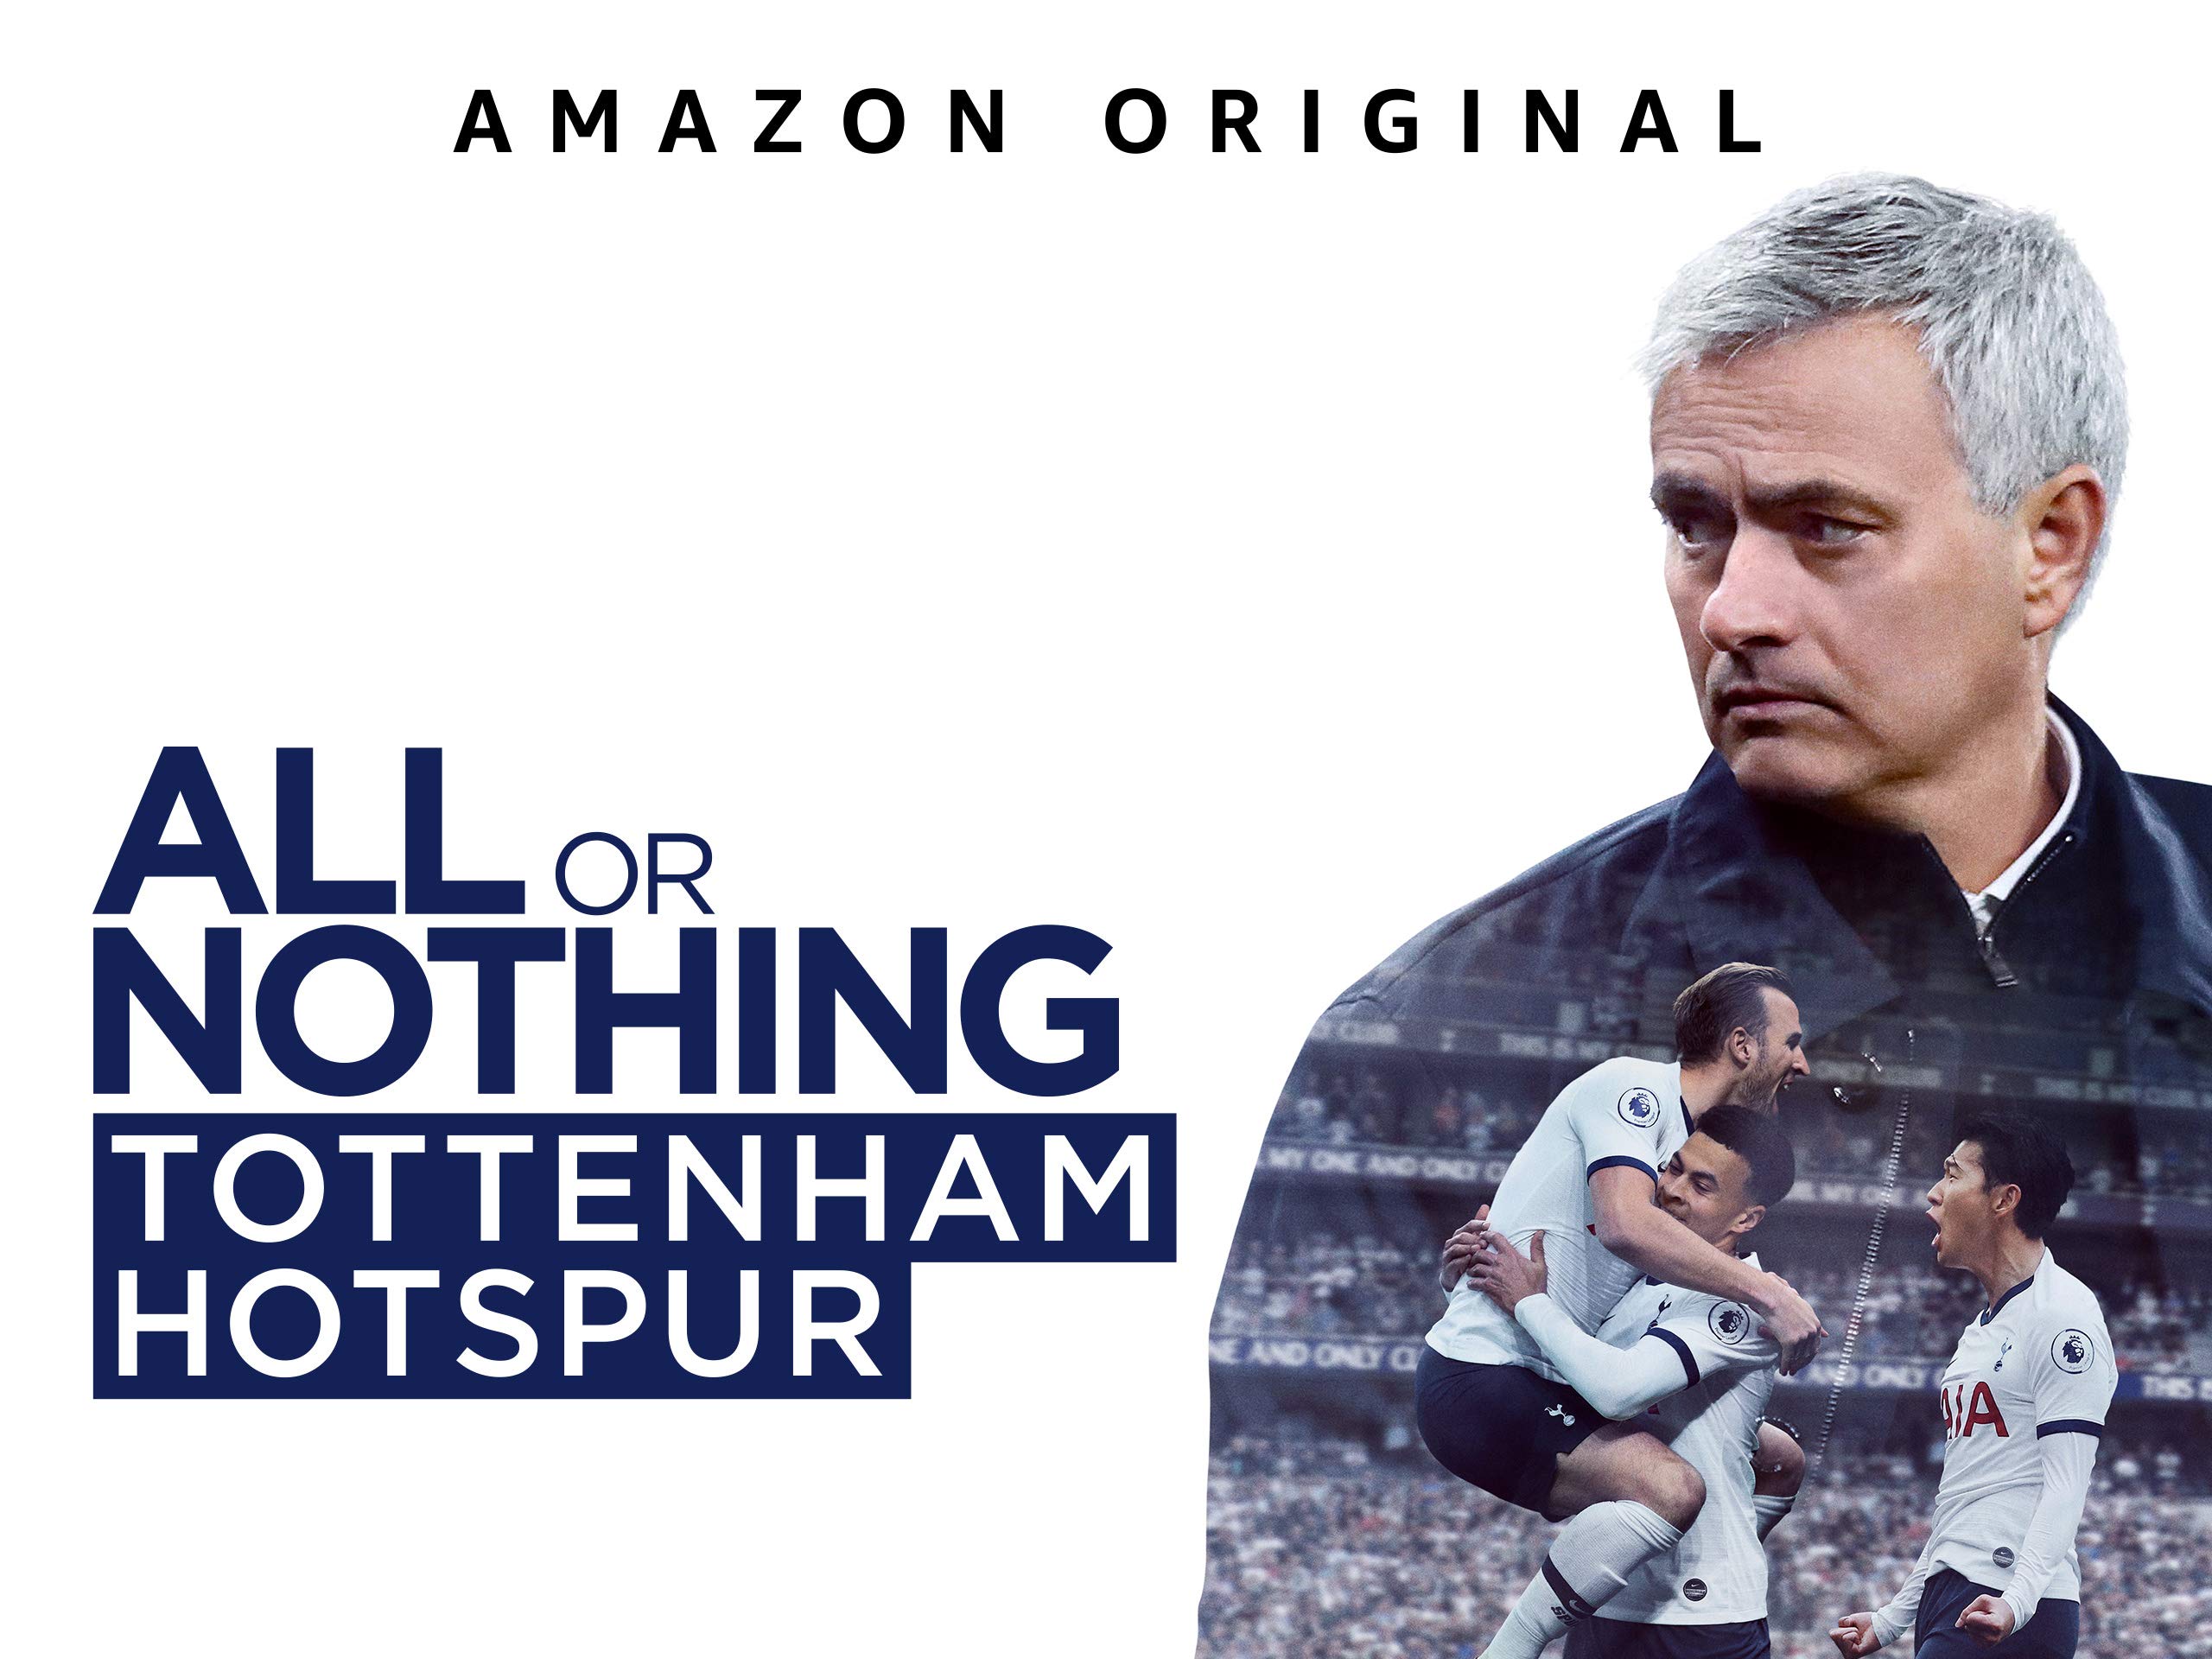 Dele Alli slams Amazon over All or Nothing Documentary